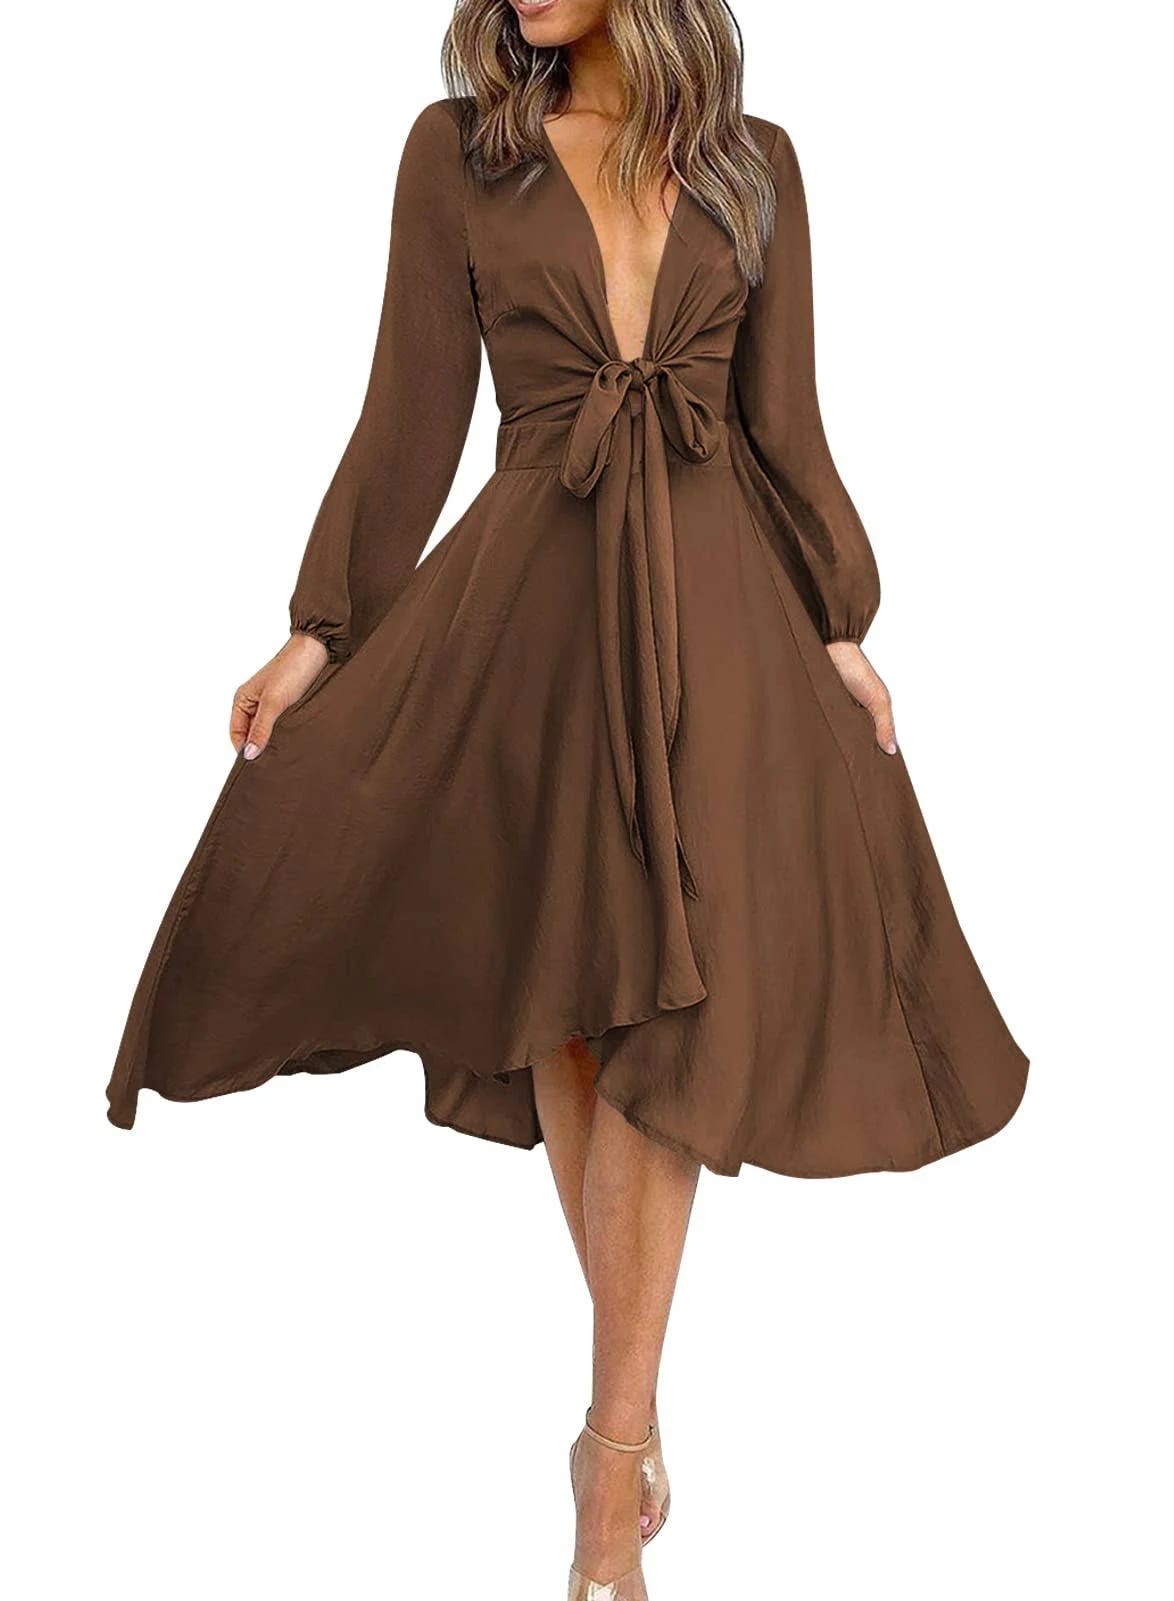 Miduo Satin V-Neck Long Sleeve High Waist Skater Midi Dress - Perfect for Cocktail Parties | Image